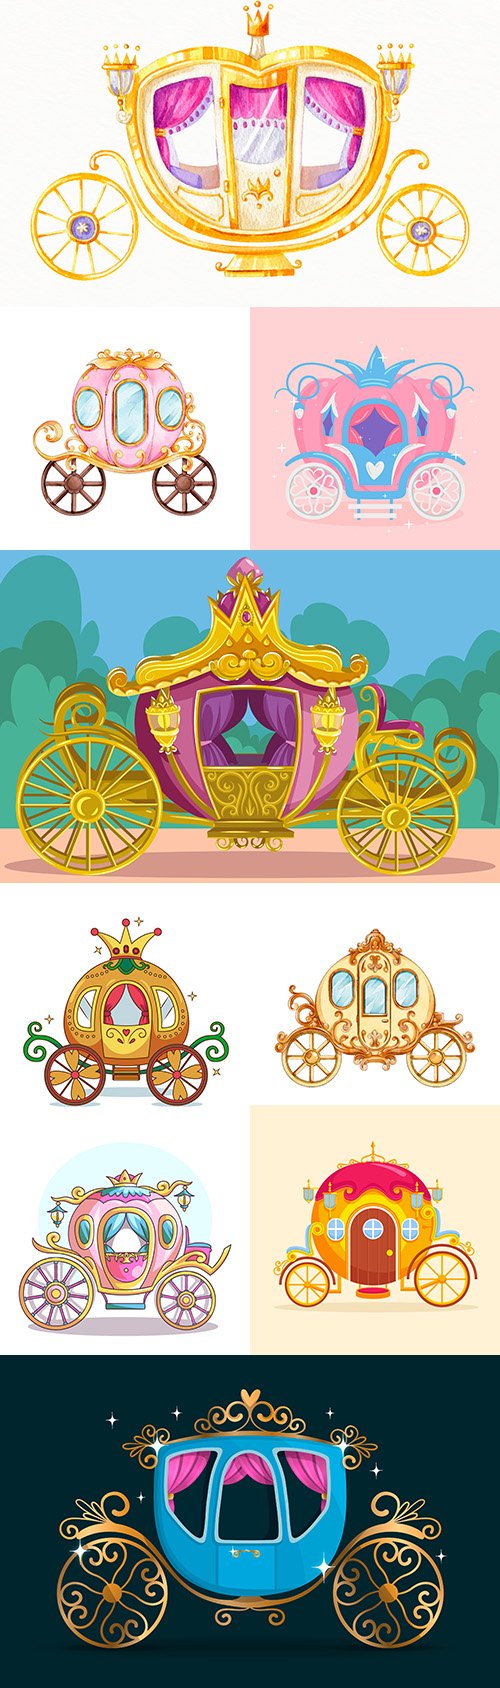 Fabulous carriage for princess collection illustrations